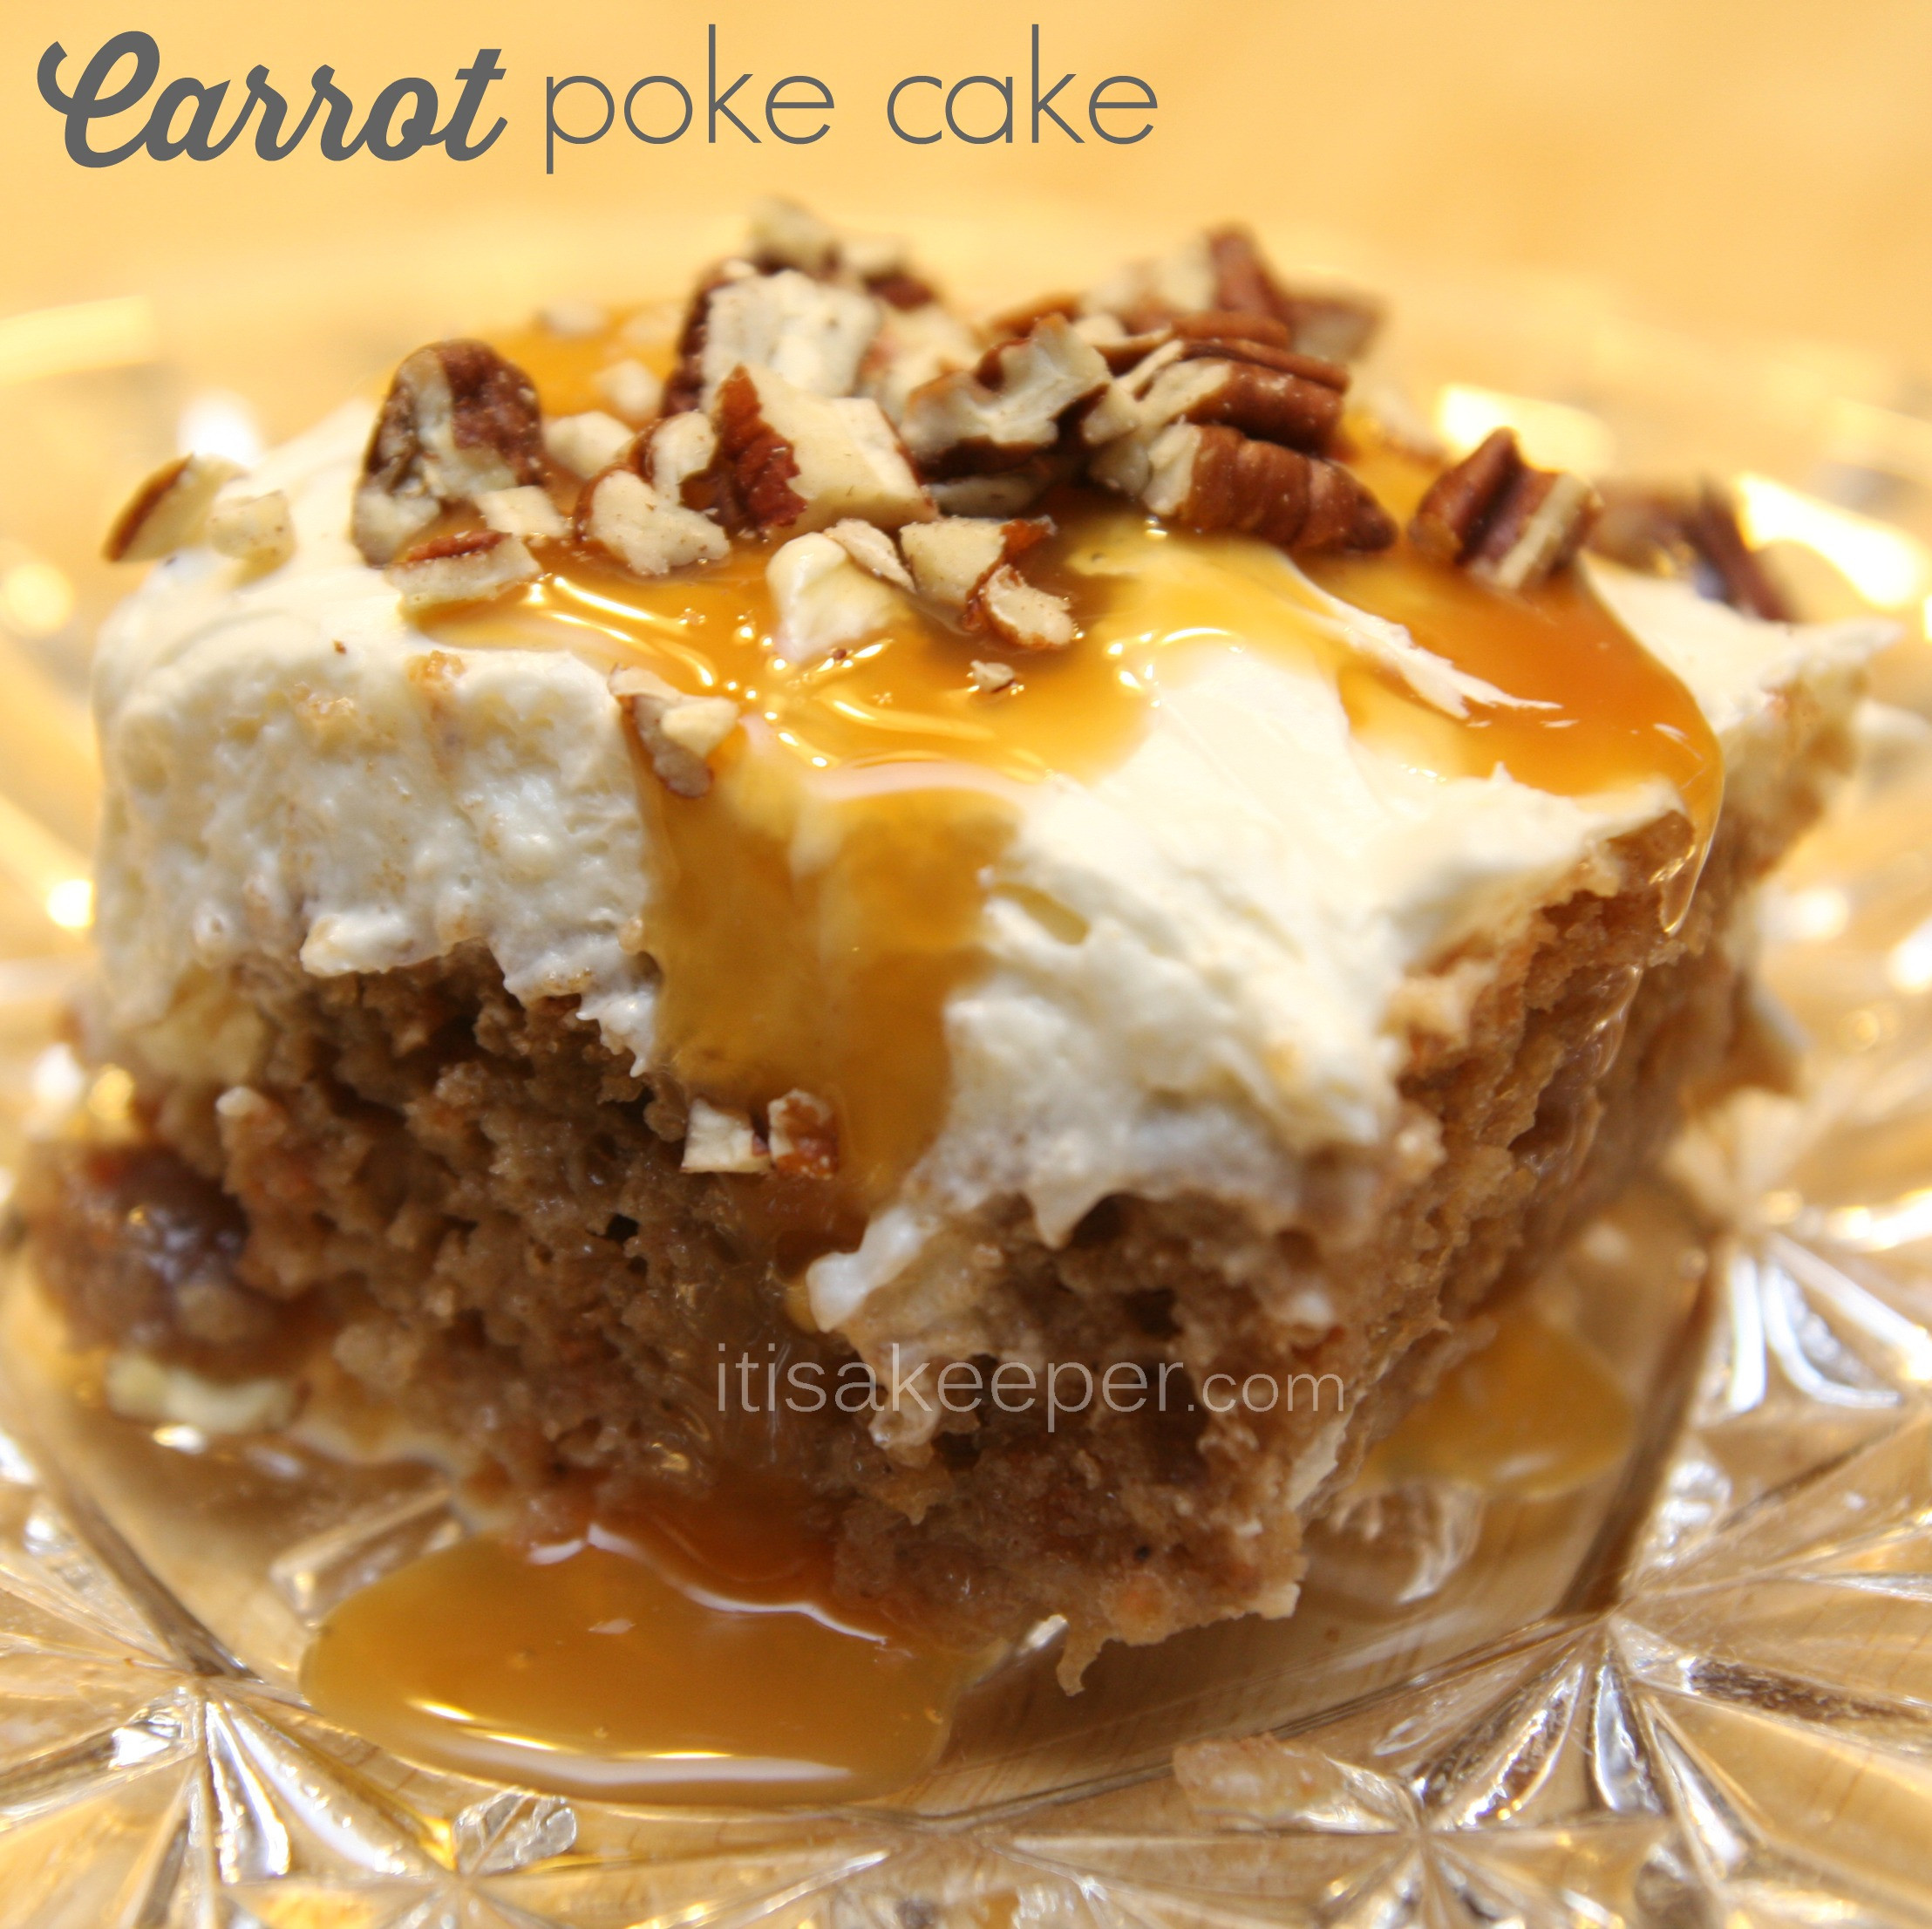 Easy Dessert Recipes With Pictures
 Carrot Poke Cake